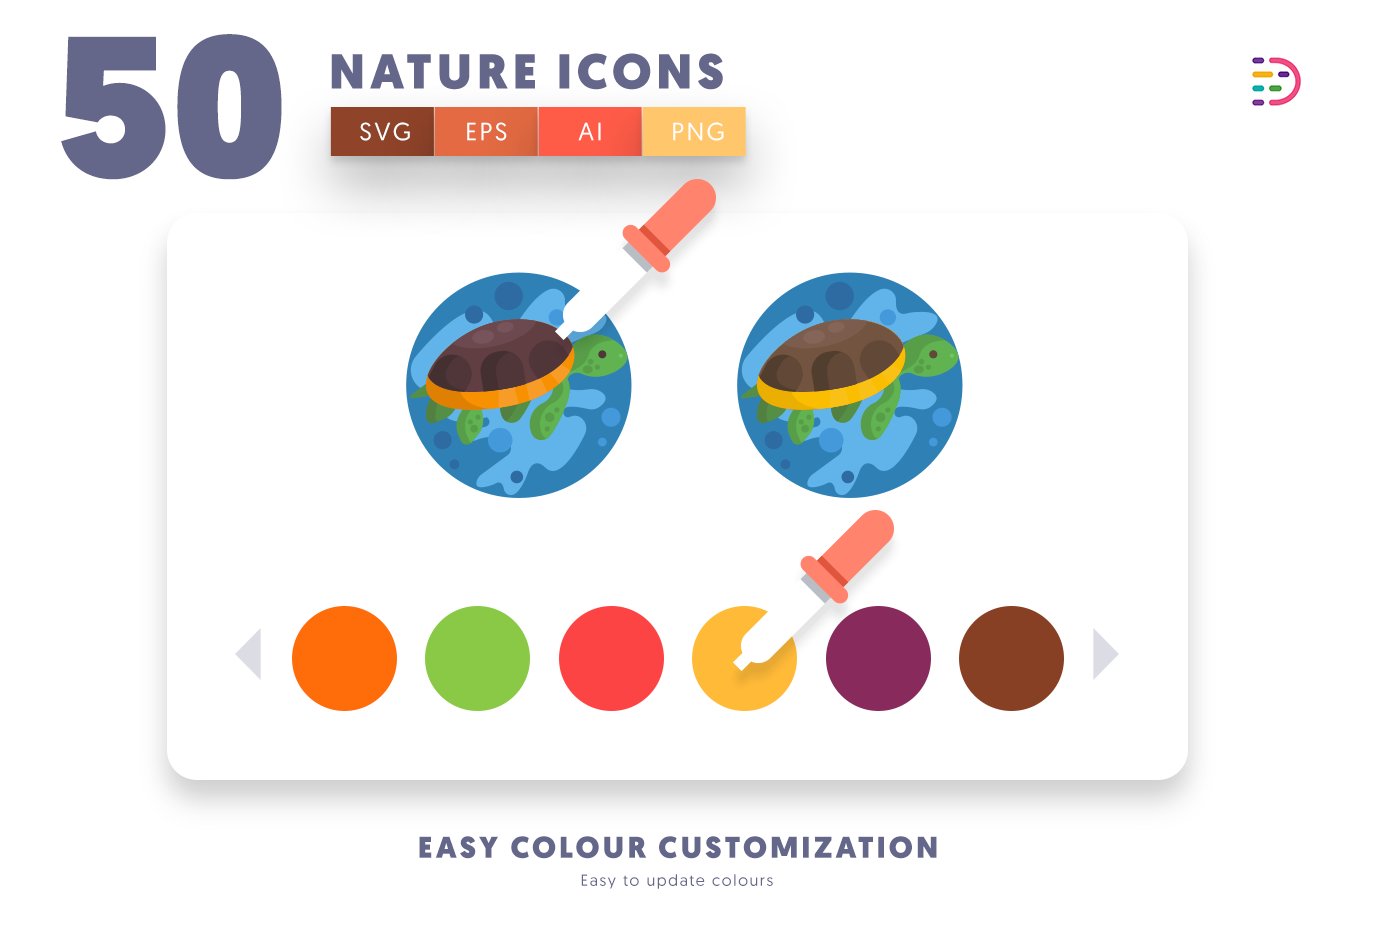 nature icons cover 7 813